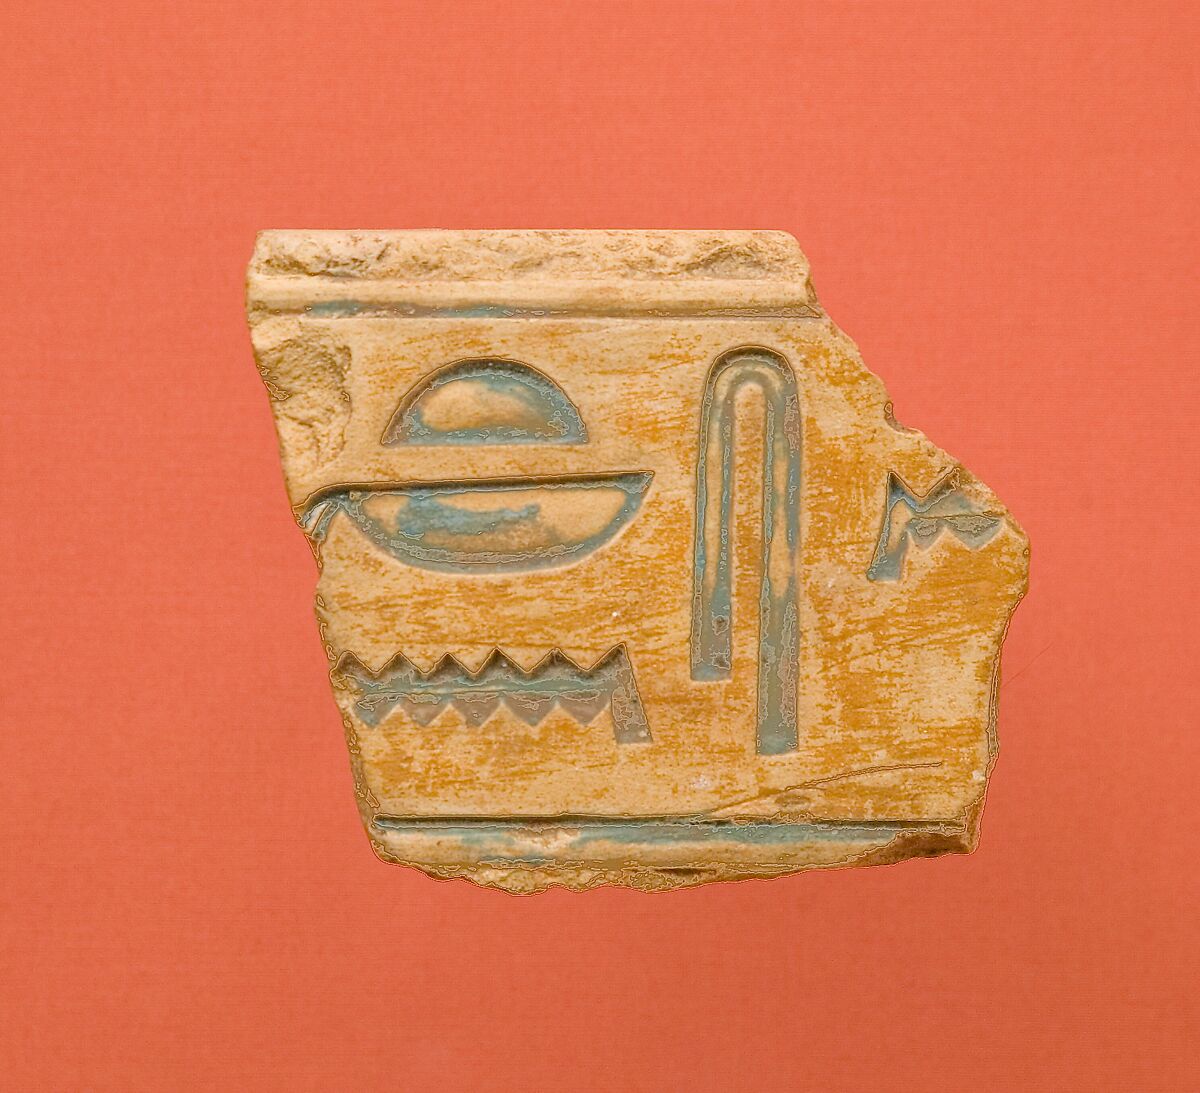 Inscribed relief fragment from the shrine of a royal woman within the temple of Mentuhotep II, Limestone, paint 